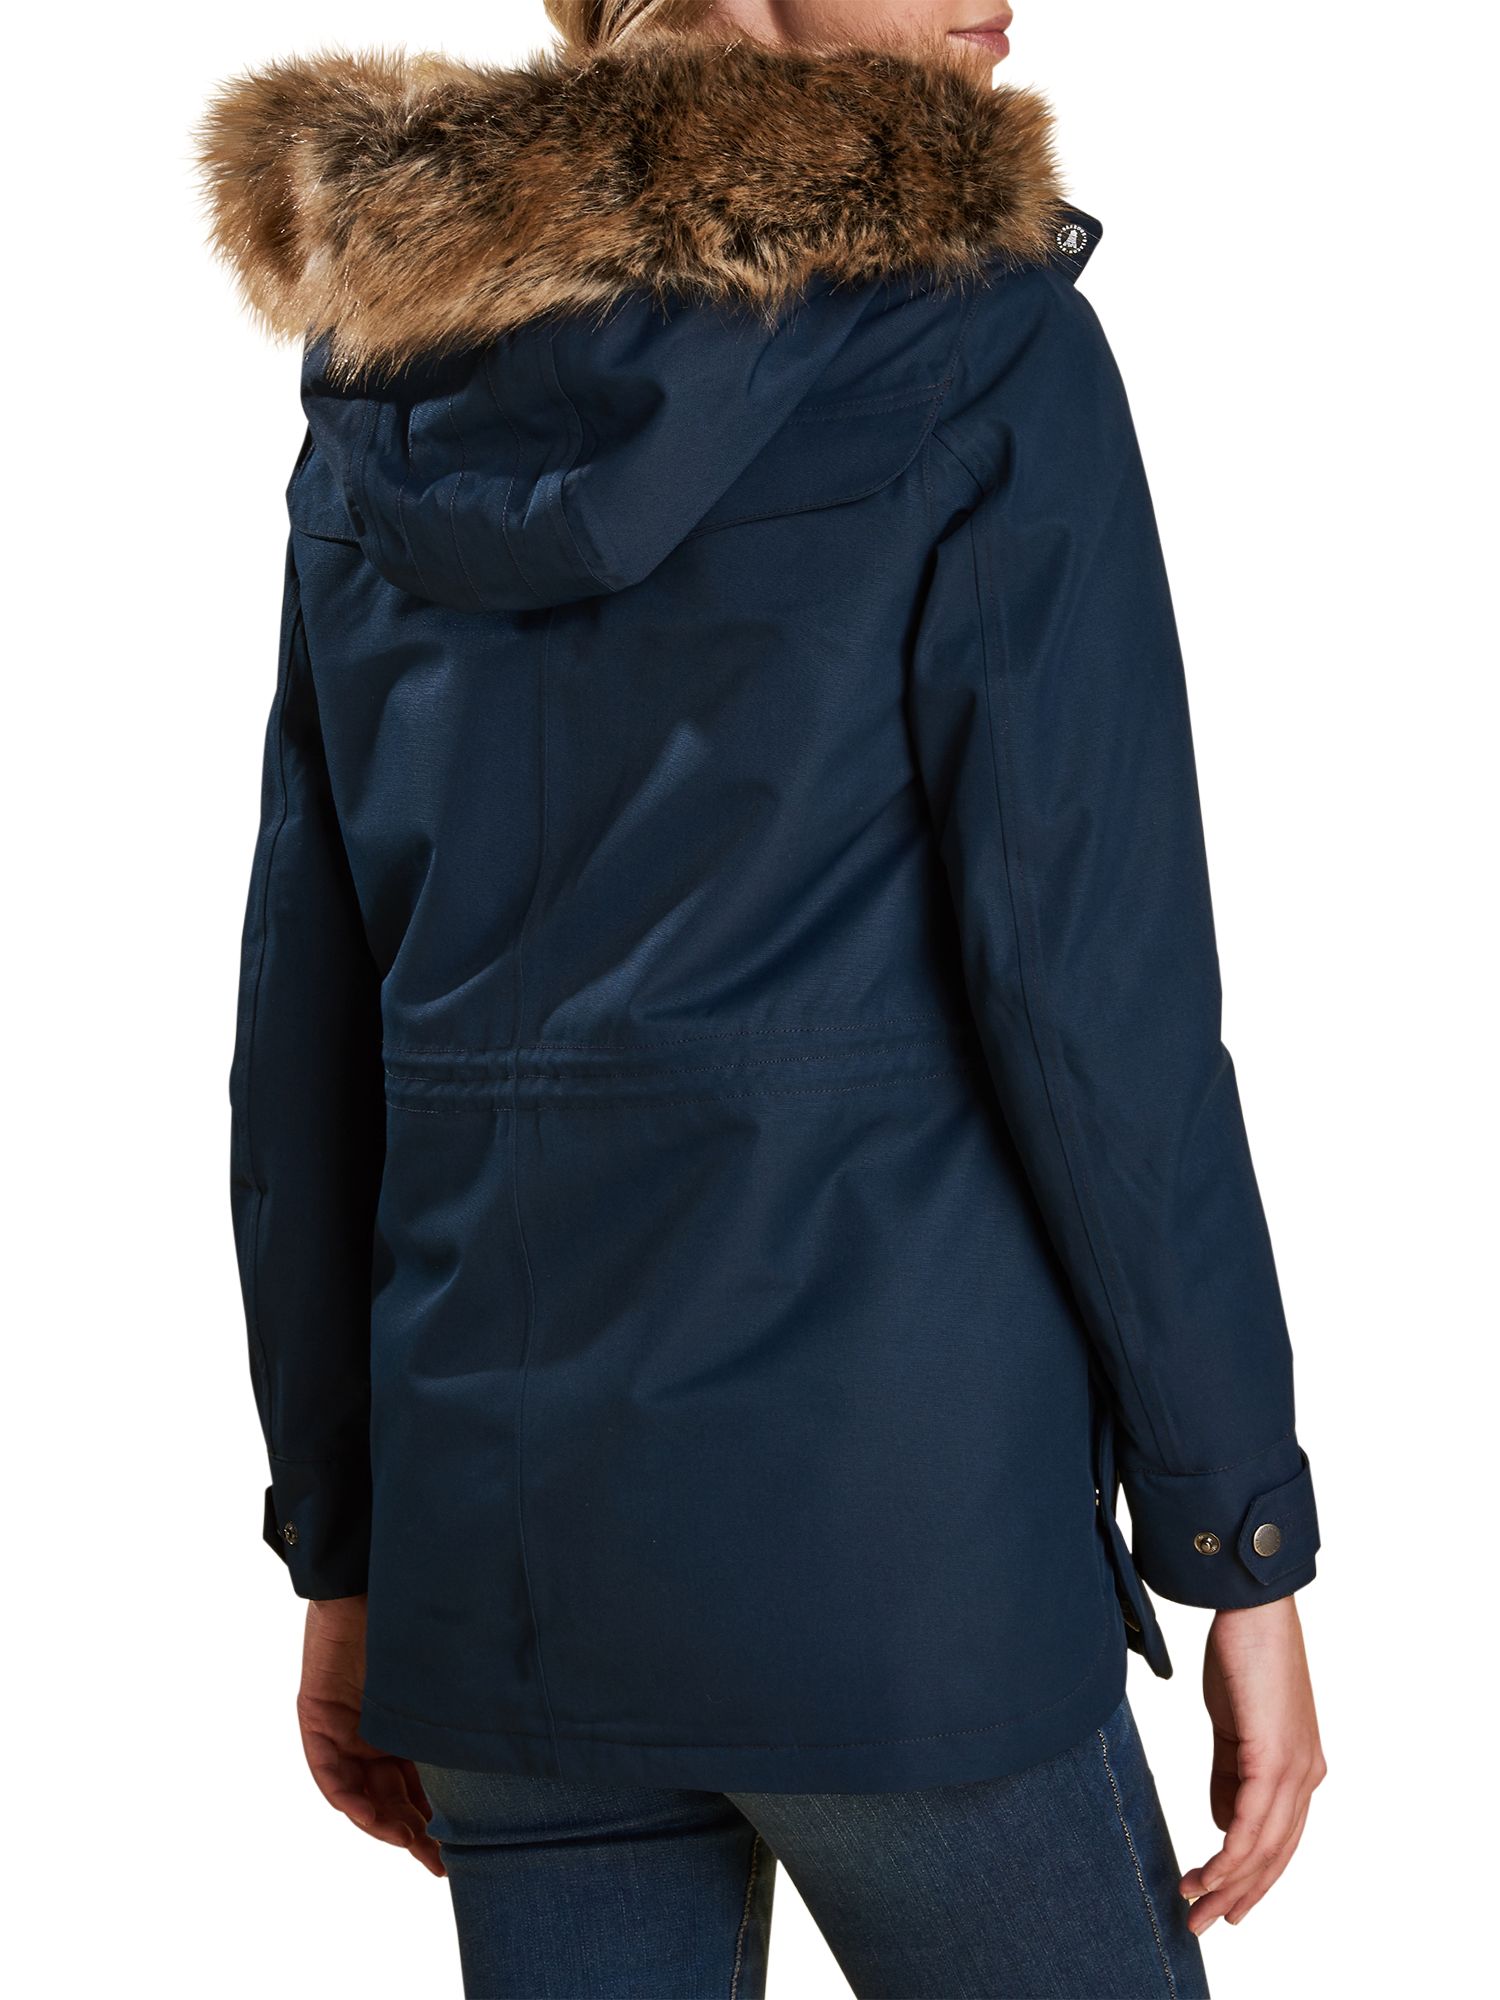 barbour stronsay waterproof breathable parka jacket